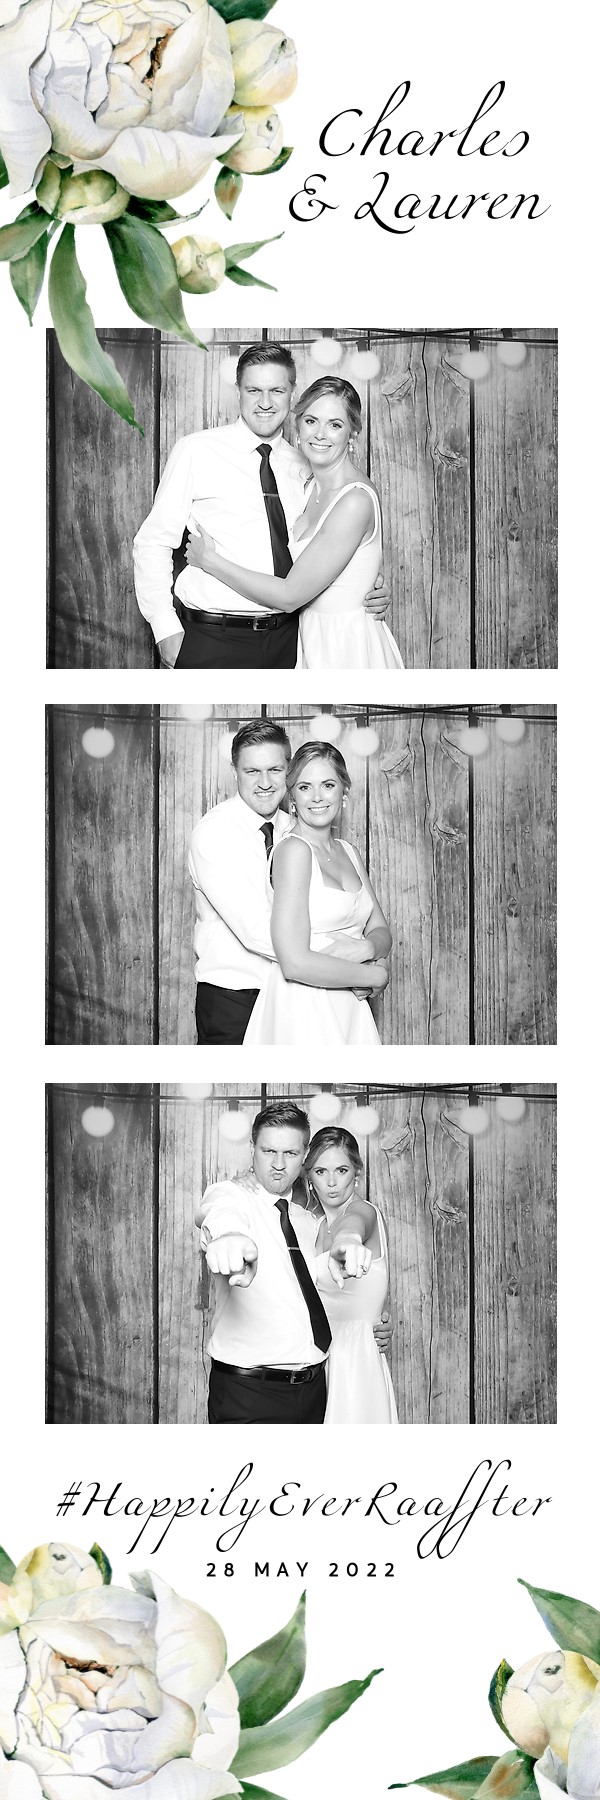 Black and White Photostrips for Photobooths - Photobooth LAB specializes in Professional Retro Styled Photobooths for Weddings and Events in KZN